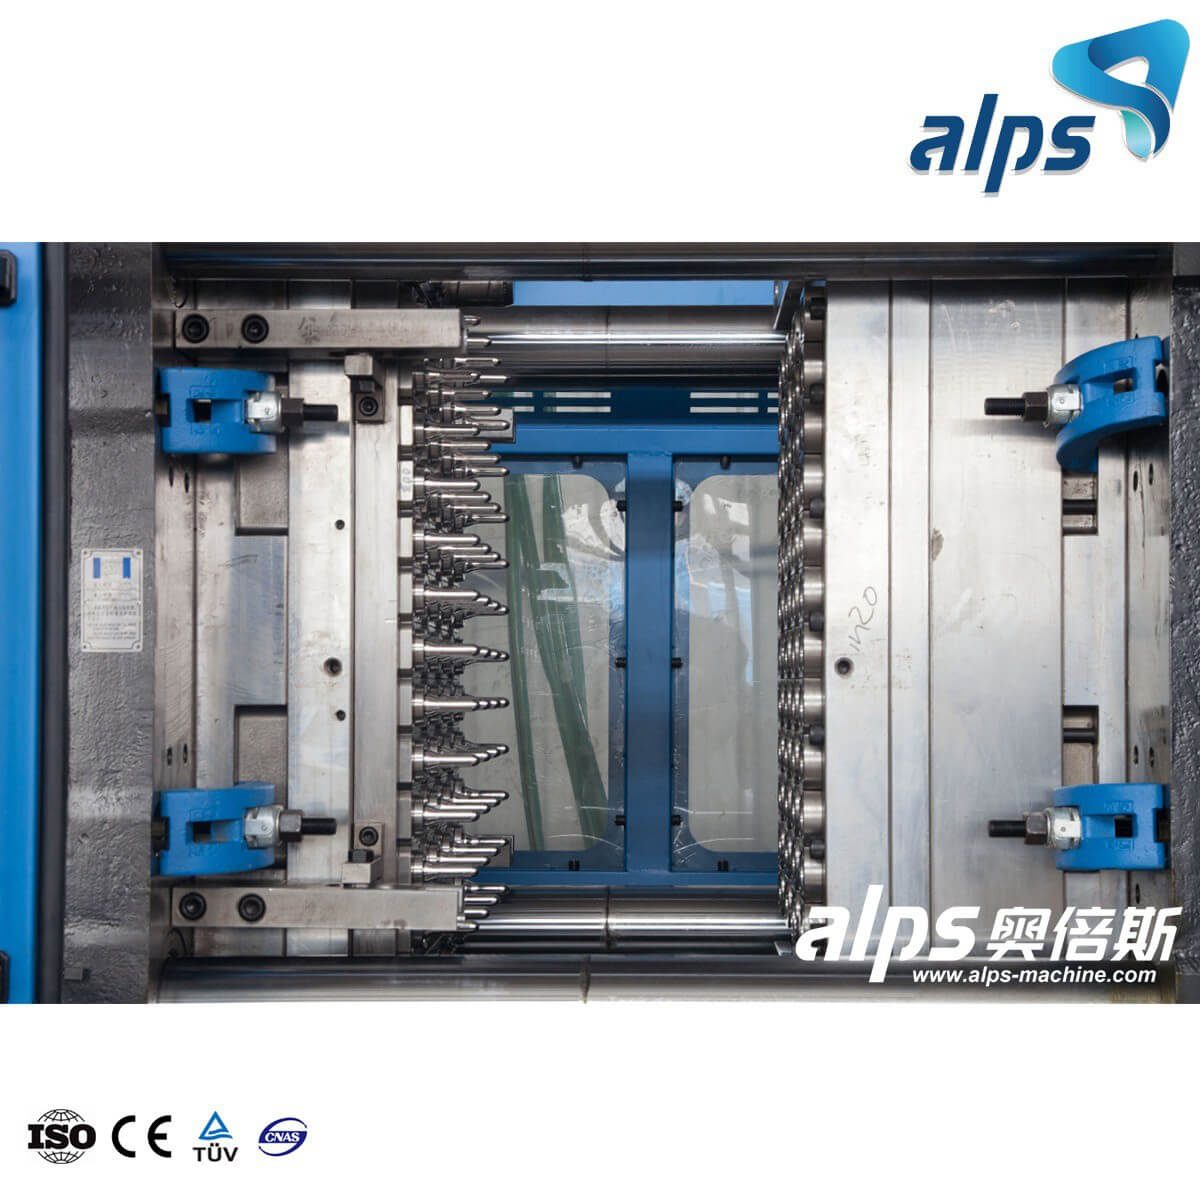 Automatic Plastic Injection Moulding Machine (INJ2400A)